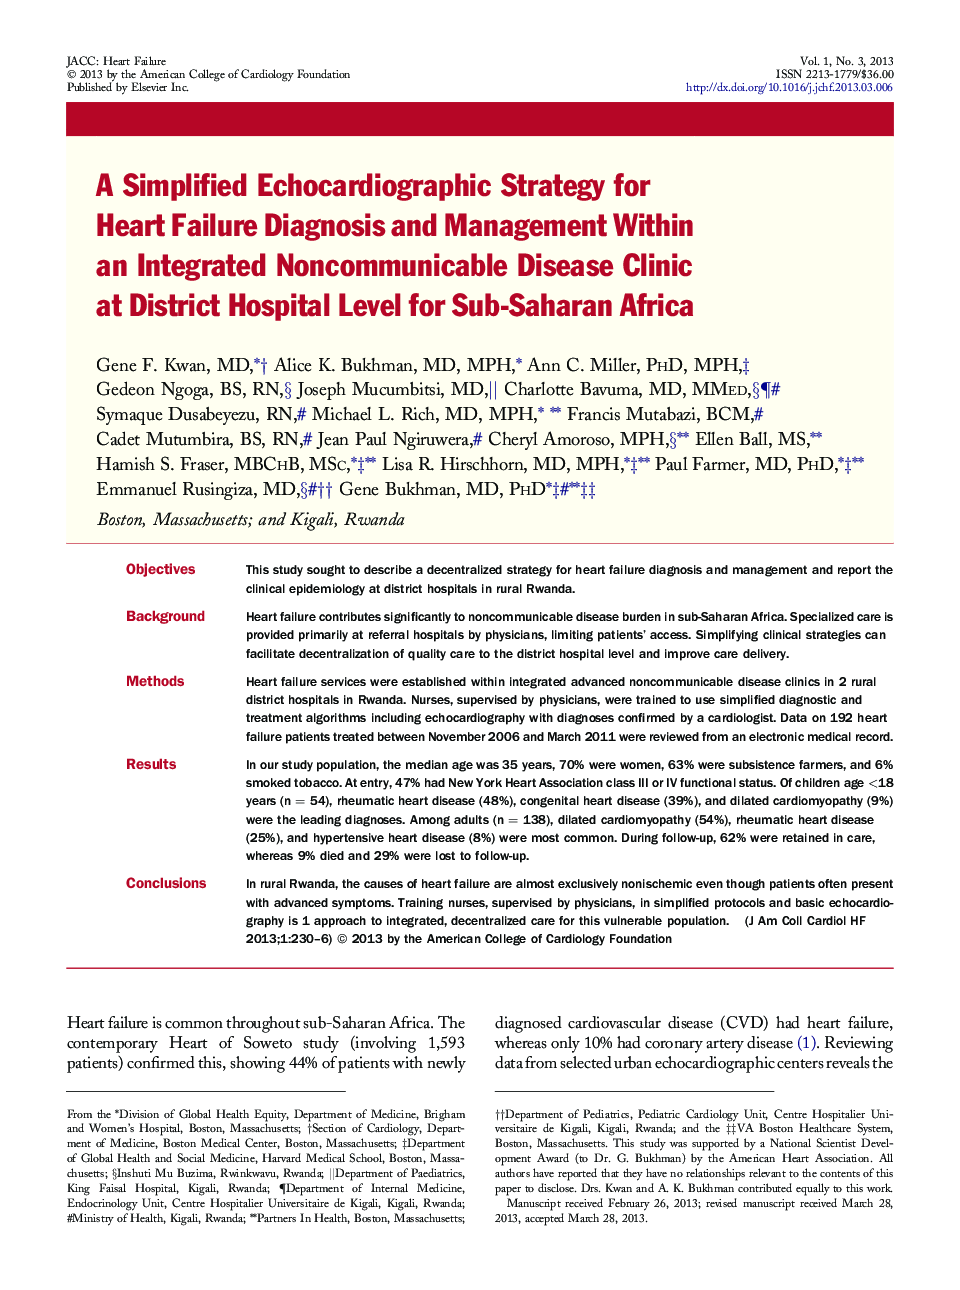 A Simplified Echocardiographic Strategy for Heart Failure Diagnosis and Management Within an Integrated Noncommunicable Disease Clinic at District Hospital Level for Sub-Saharan Africa 